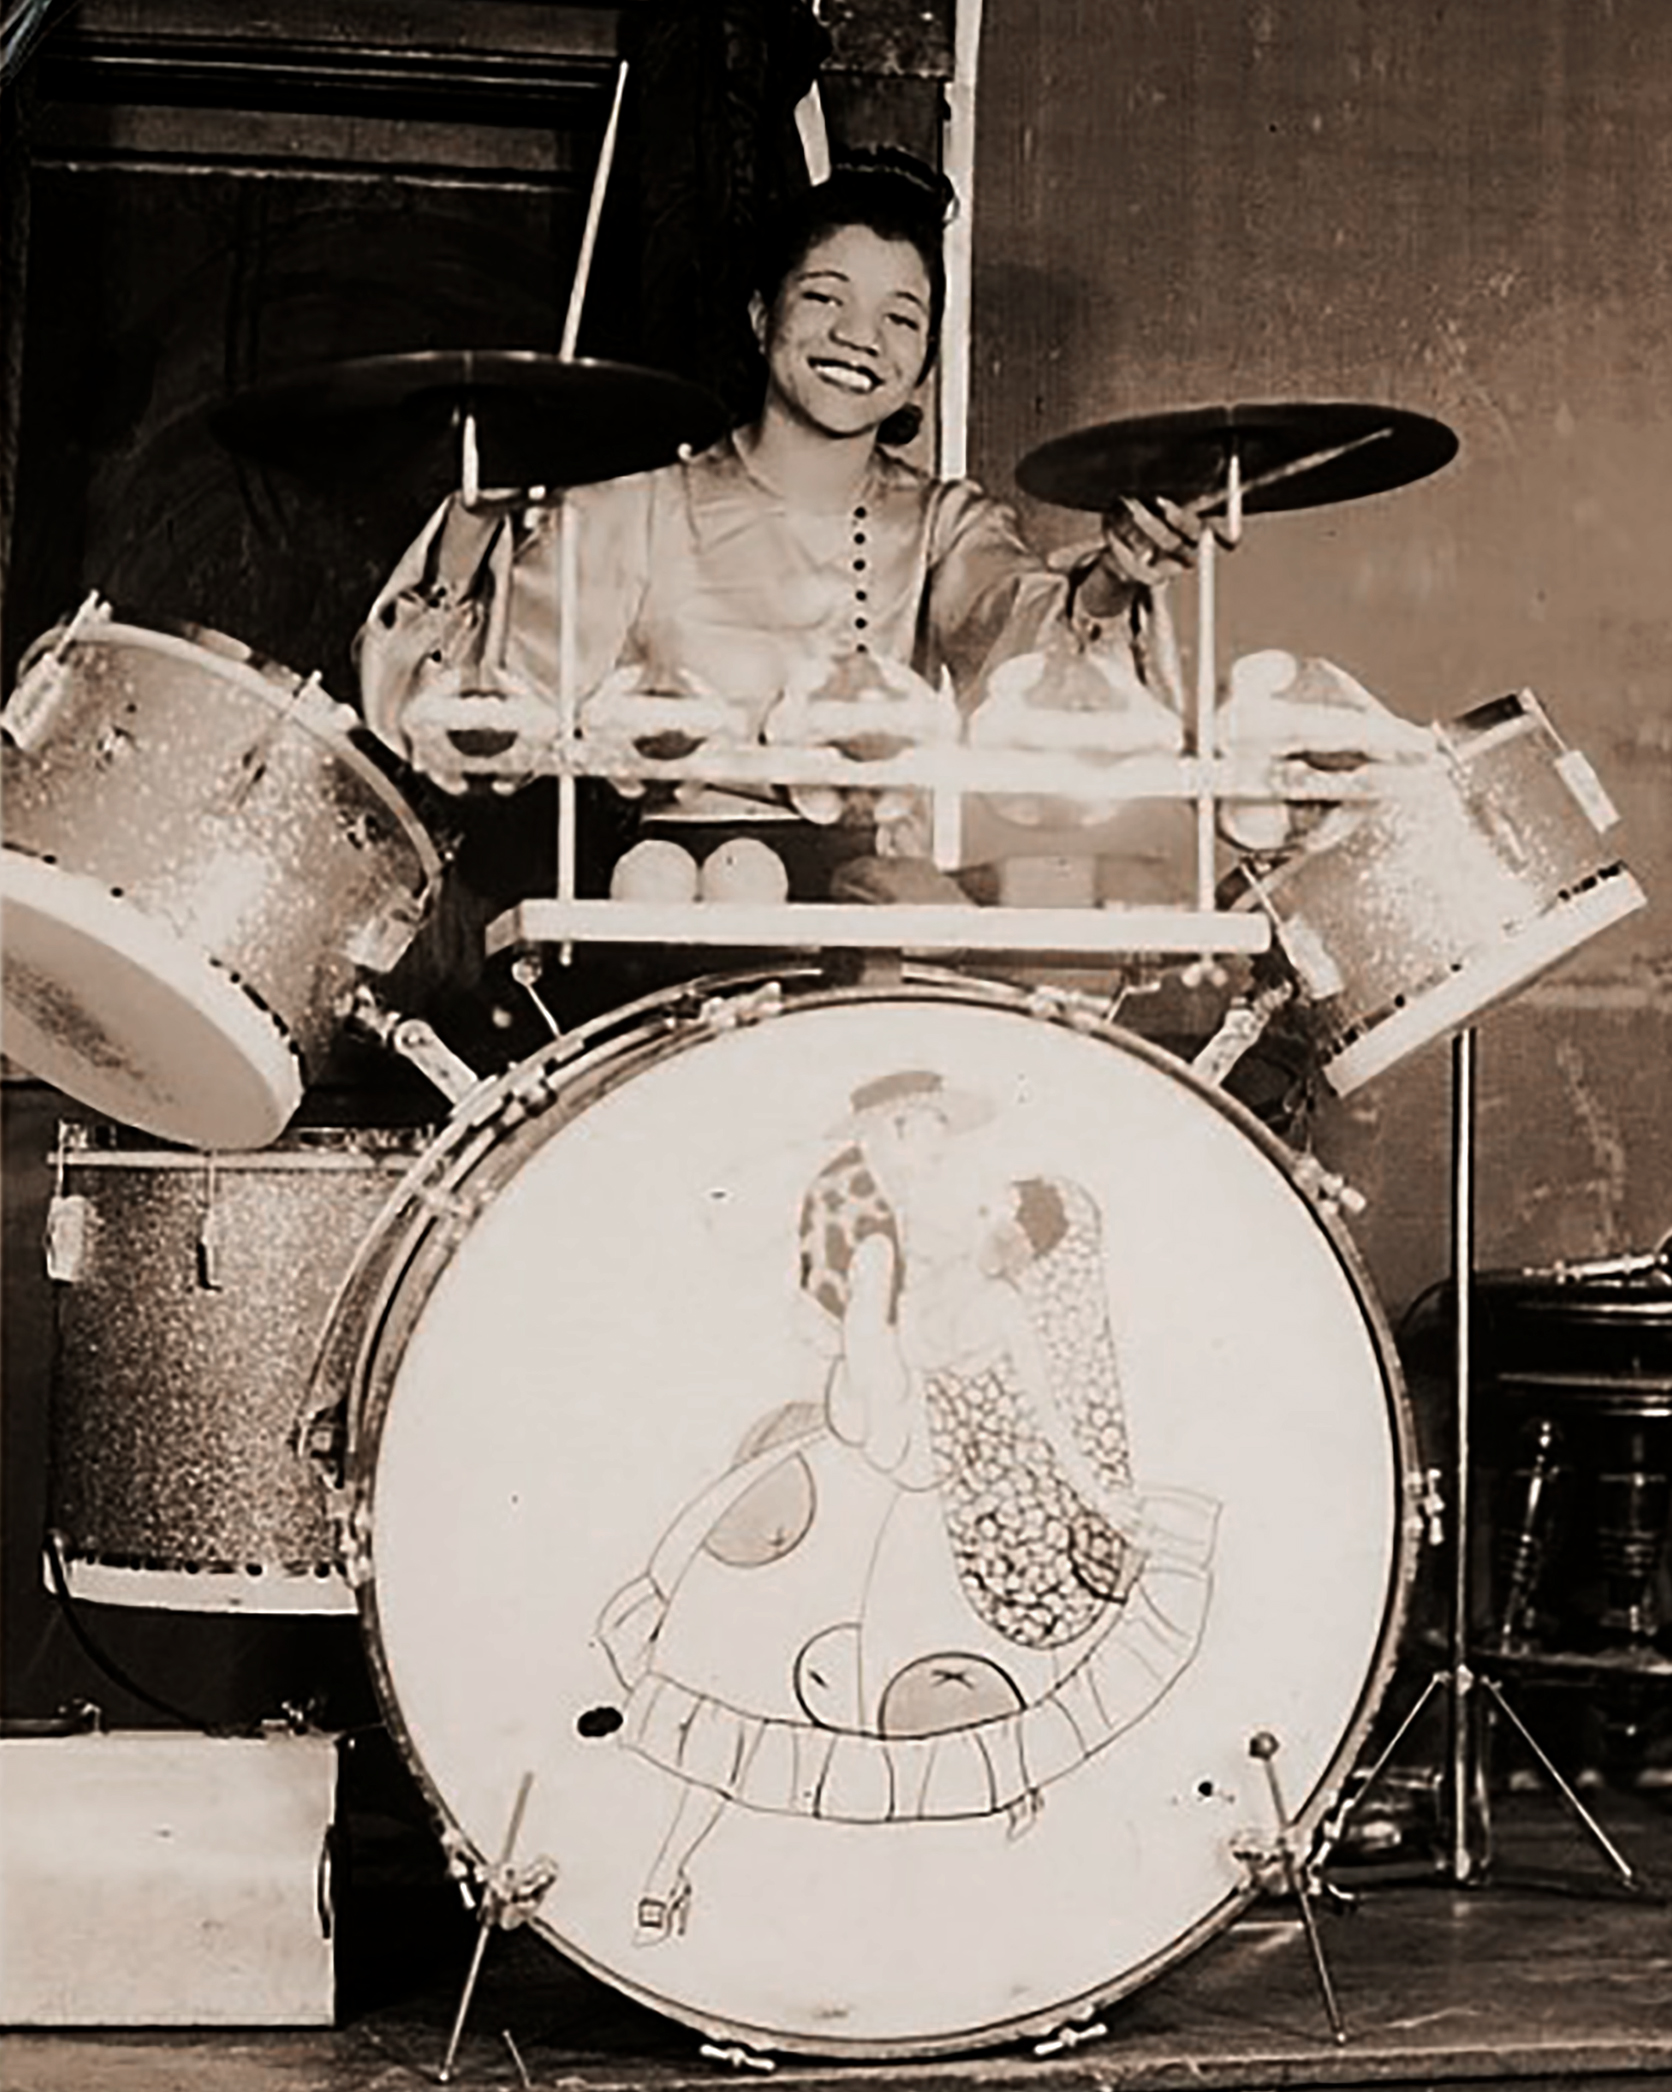 NMAH Archives CenterInternational Sweethearts of Rhythm Collection 1218 Series 1: Piney Woods Box 1 Folder 1 Photographer Stamp: The Teal Studio, Houston, Texas "Pauline Braddy, member of The Piney Woods All Girls Band, Sweethearts of Rhythm" drummer